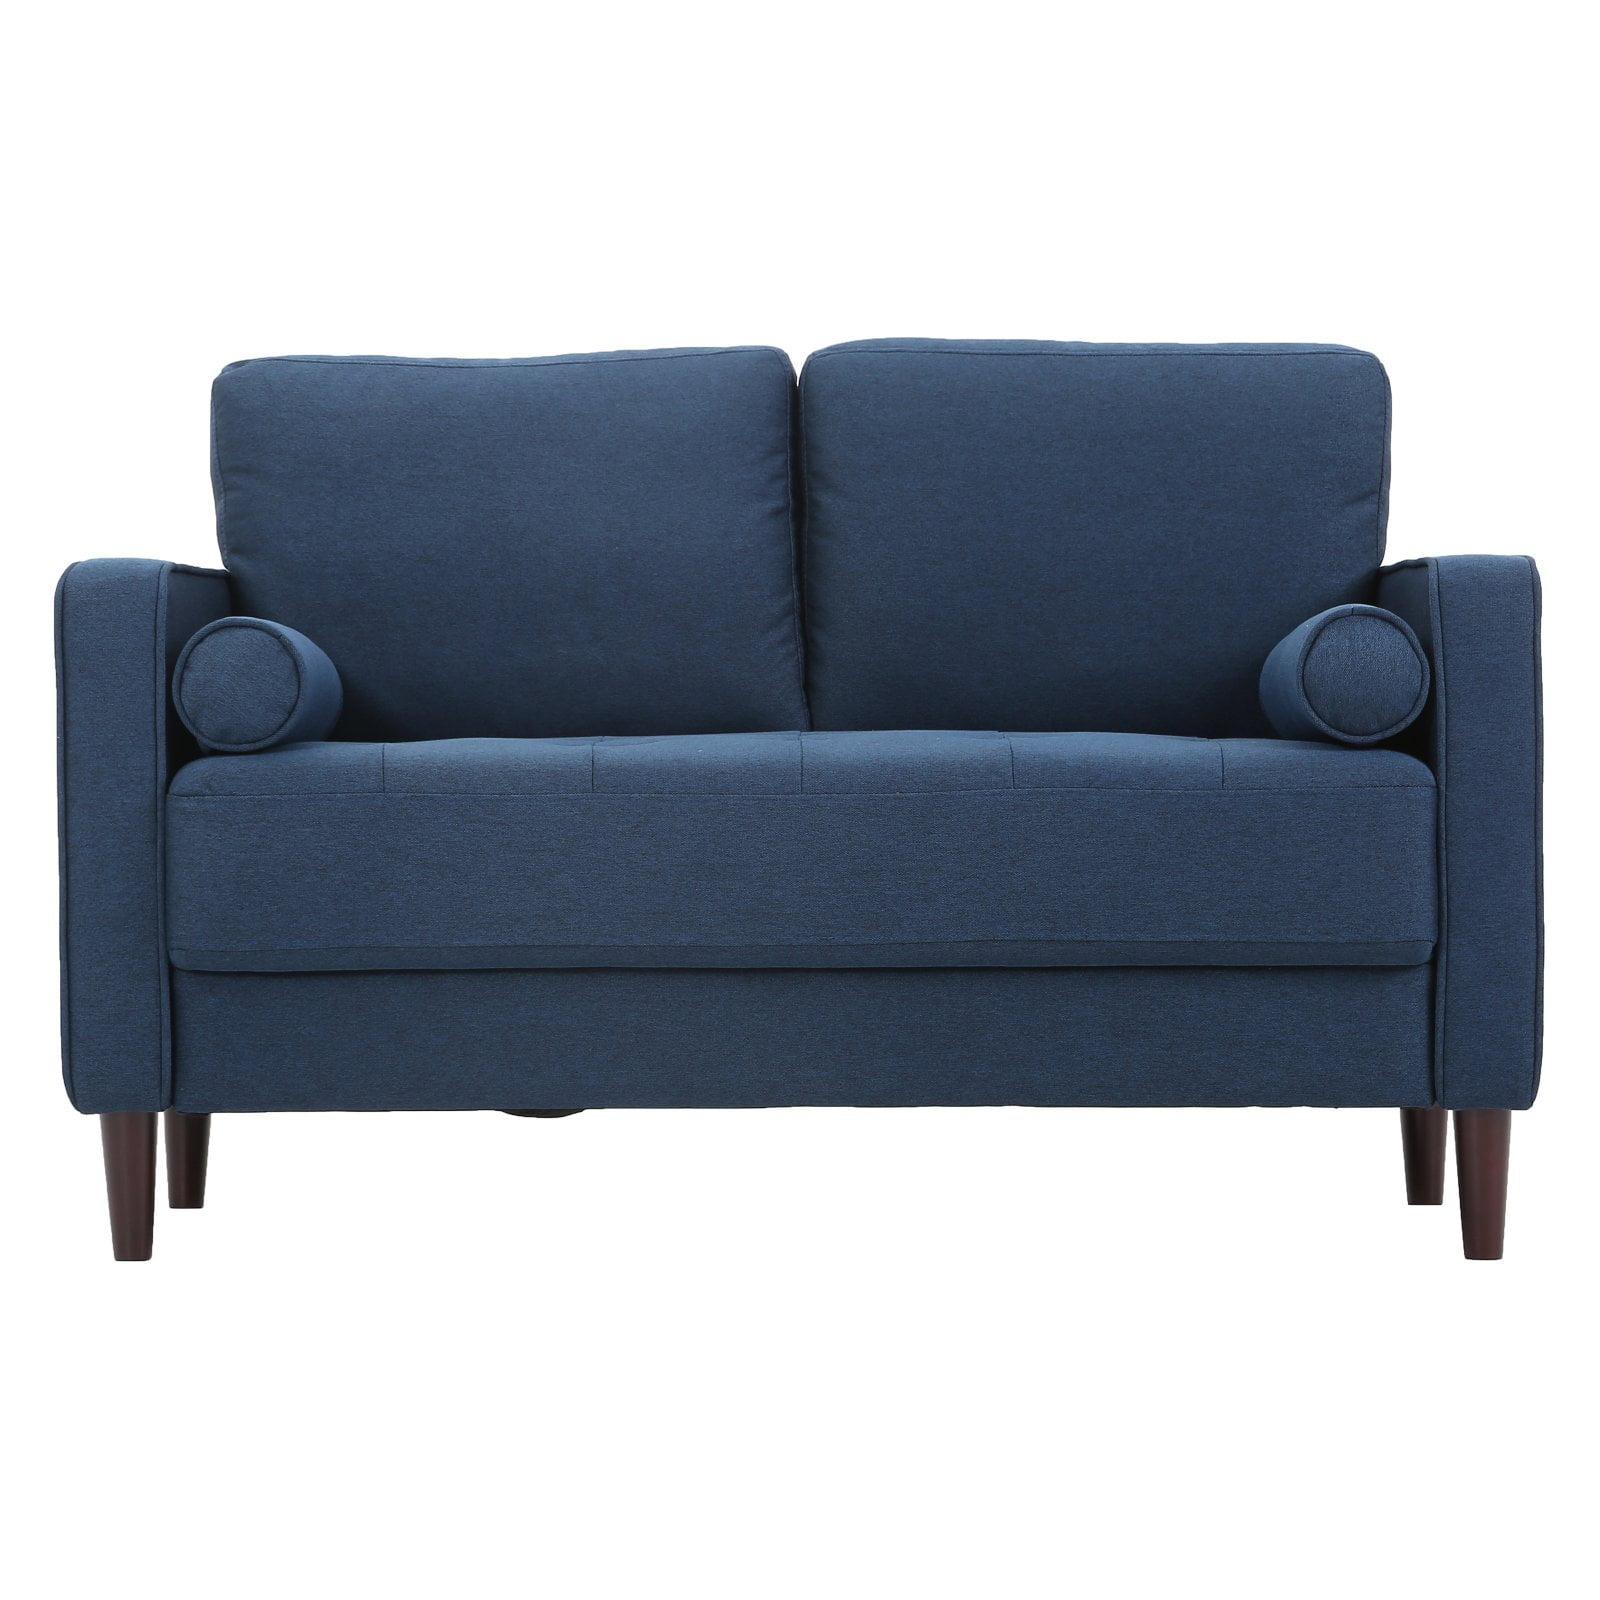 Navy Tufted Microfiber Loveseat with Wood Frame and Removable Cushions